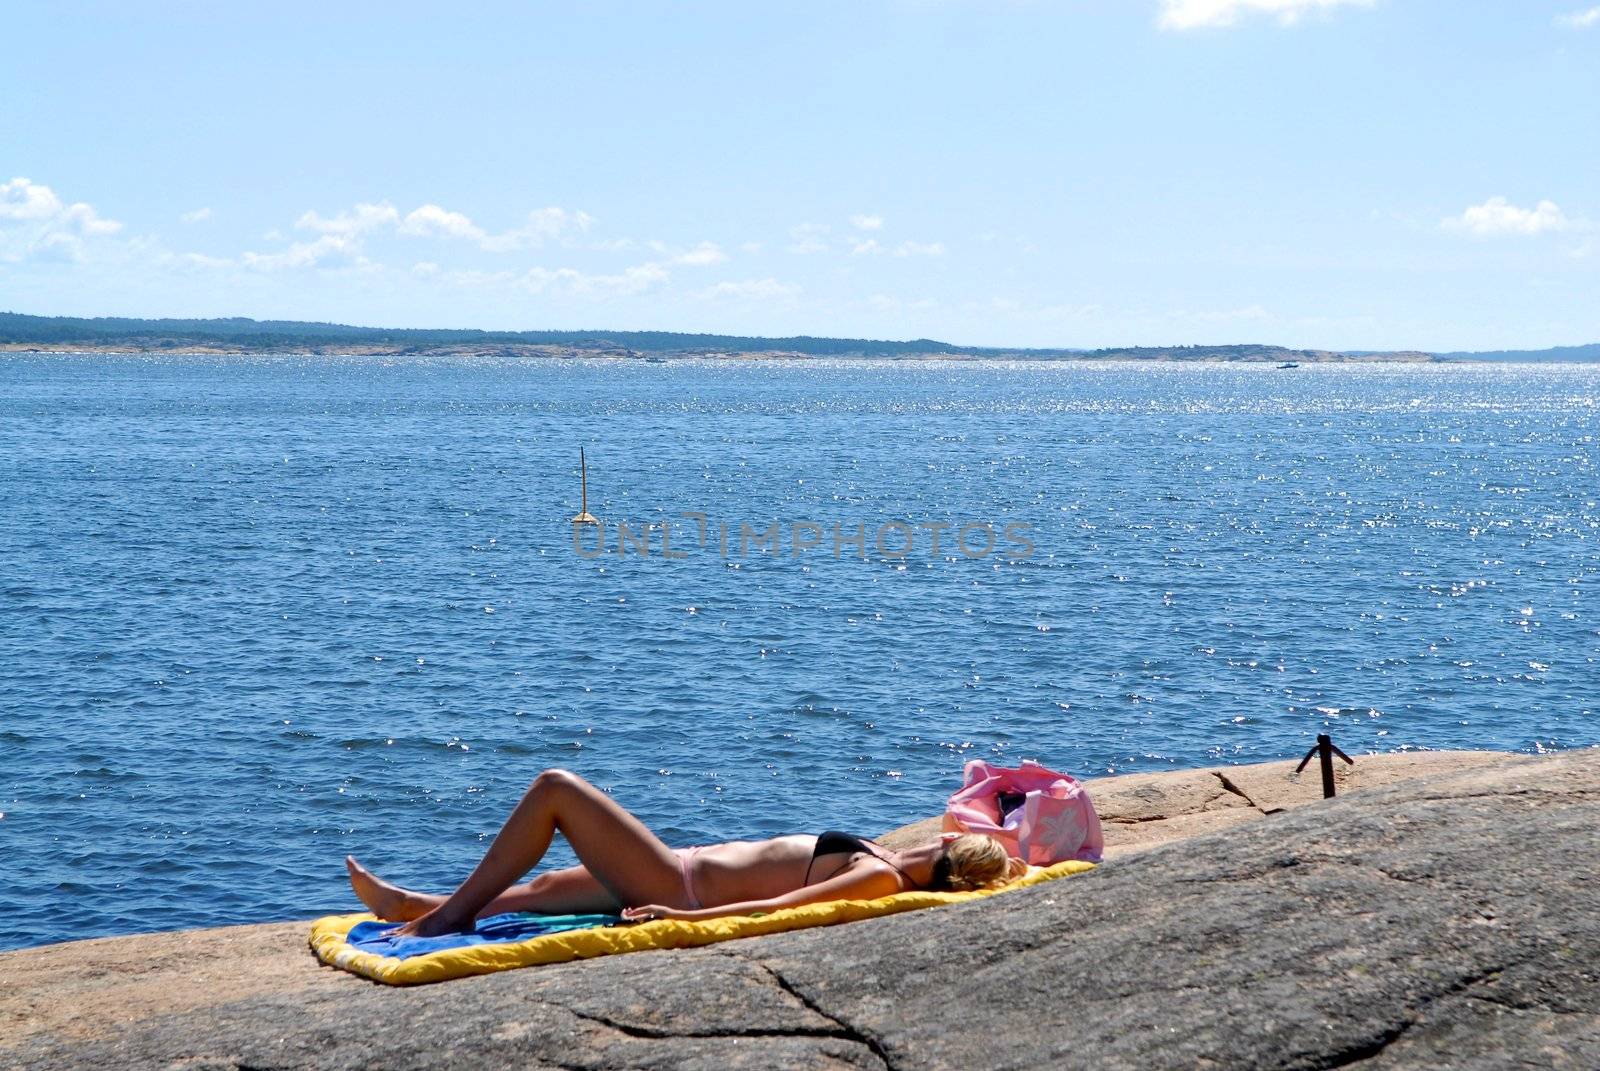 lady lying on the rock. Please note: No negative use allowed.